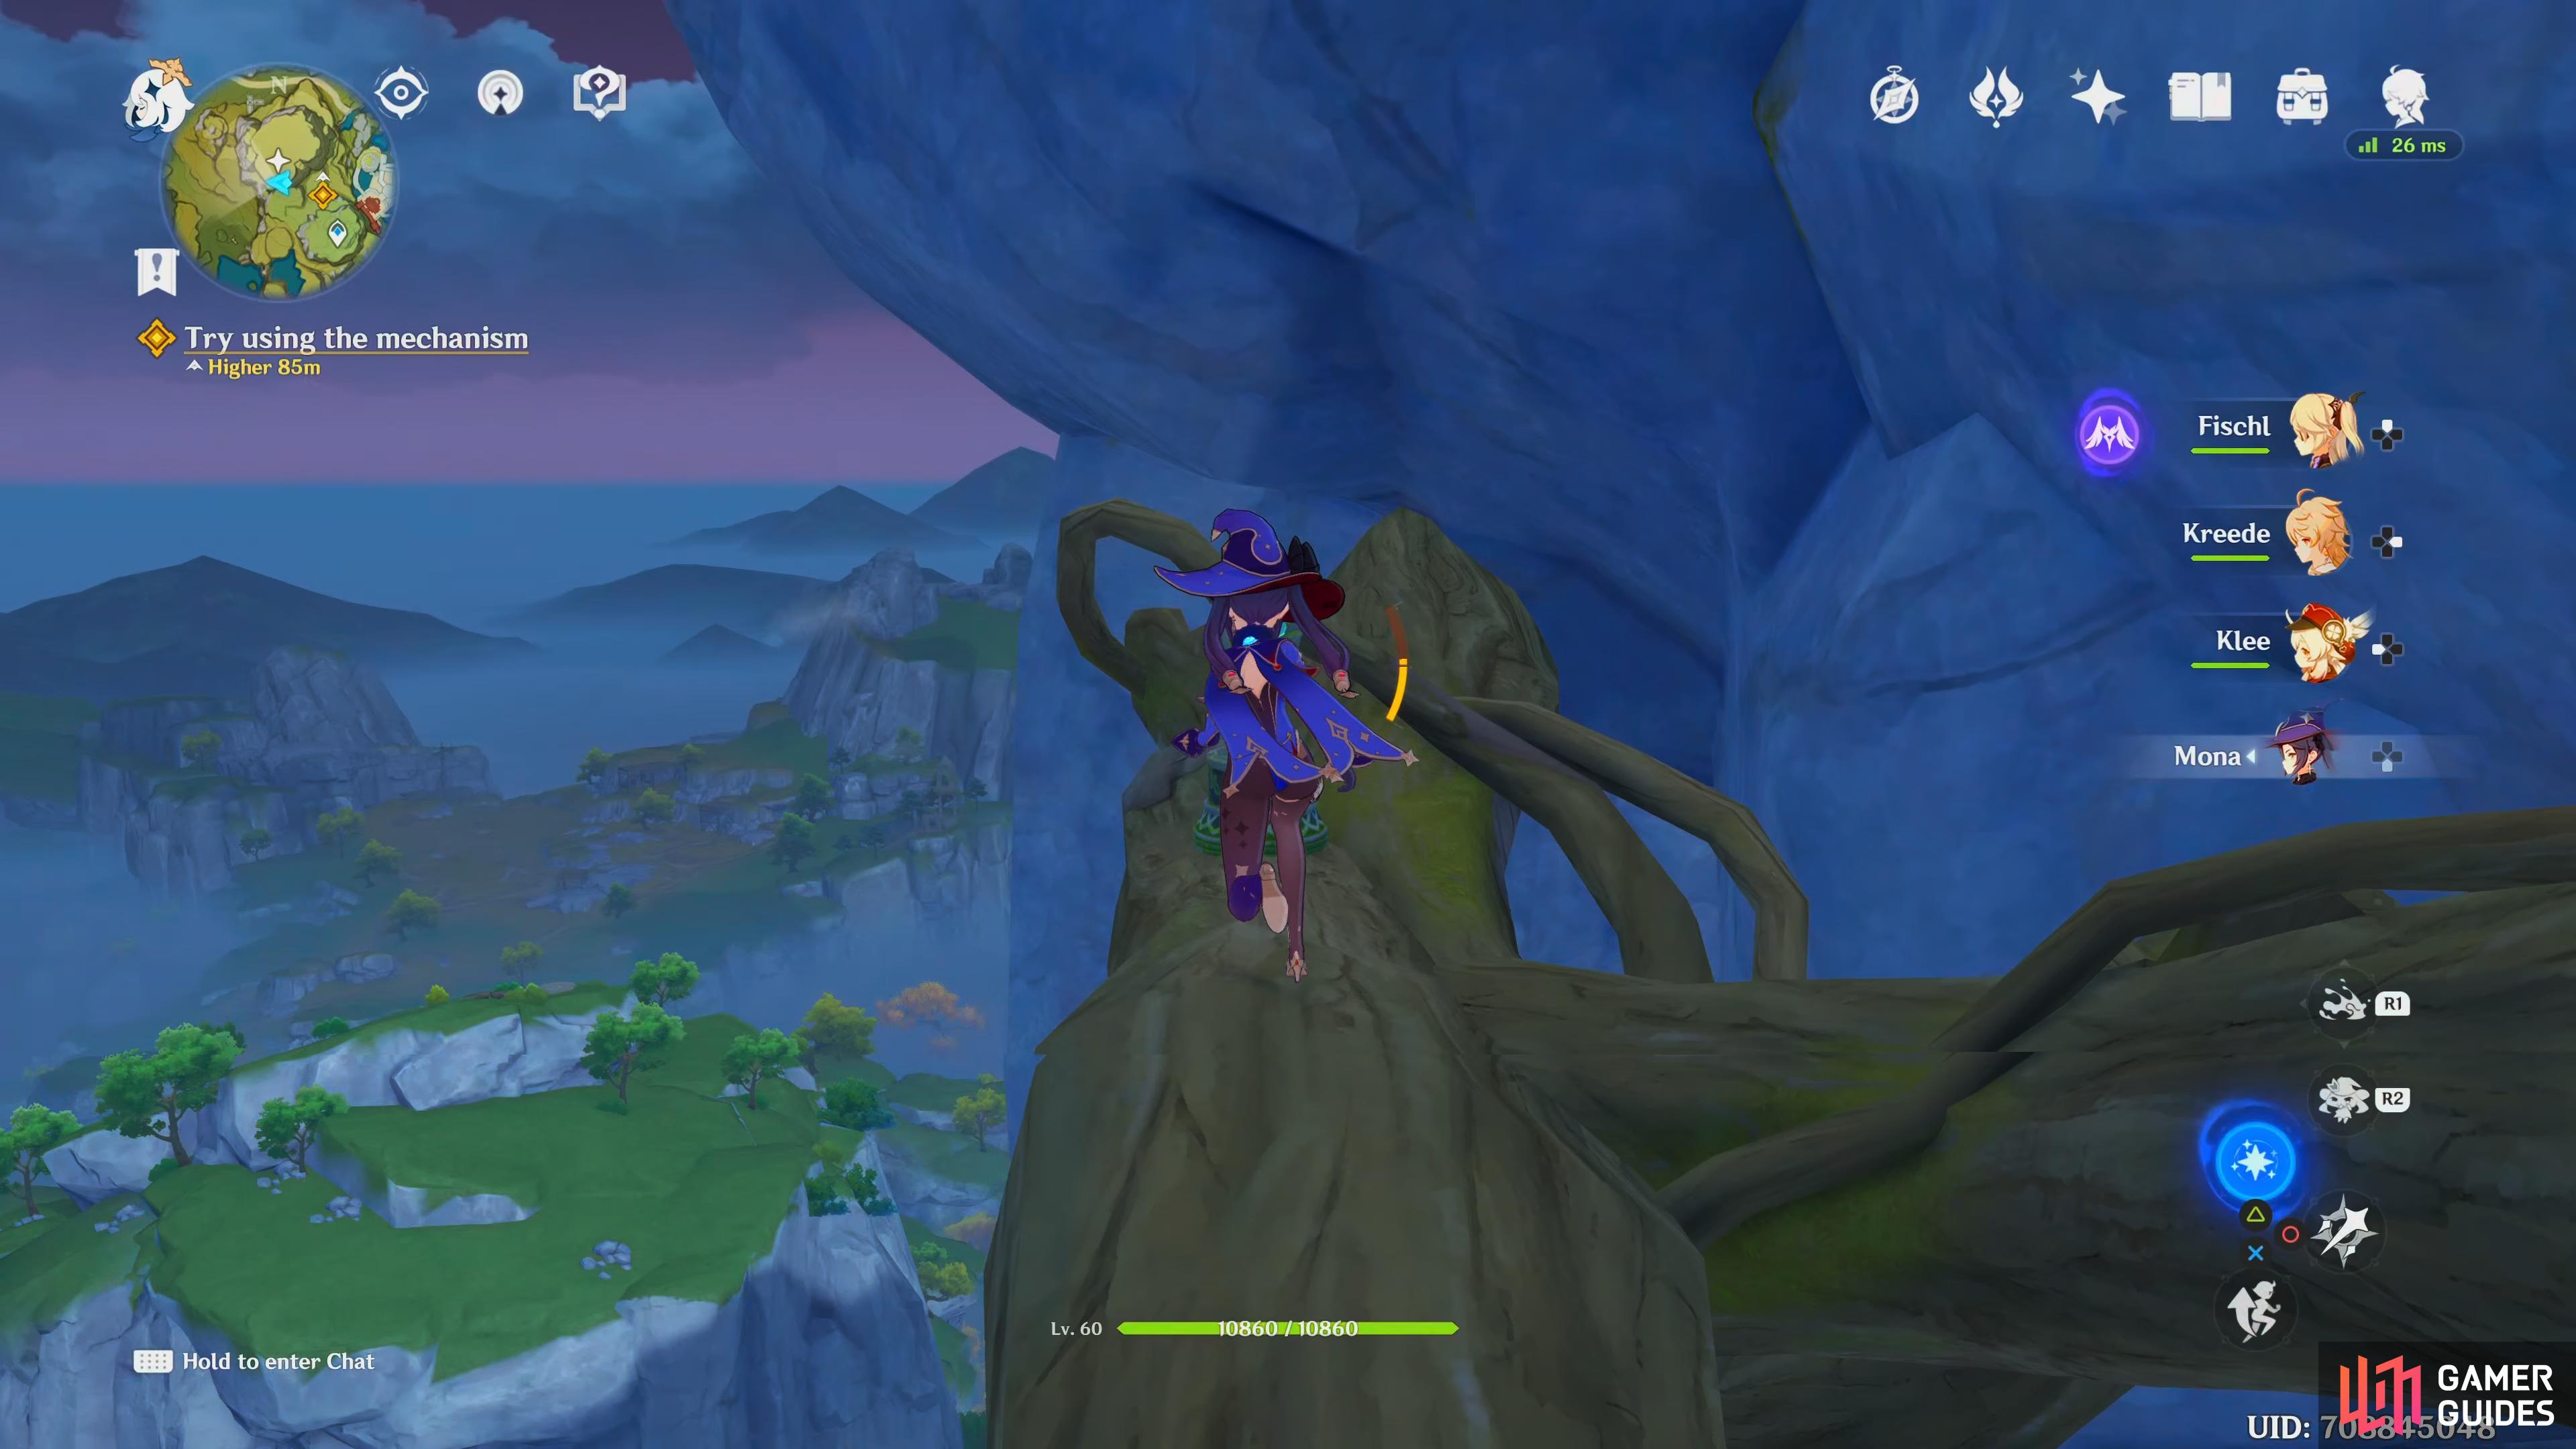 Use the vines on the side of the mountain to help climb up it